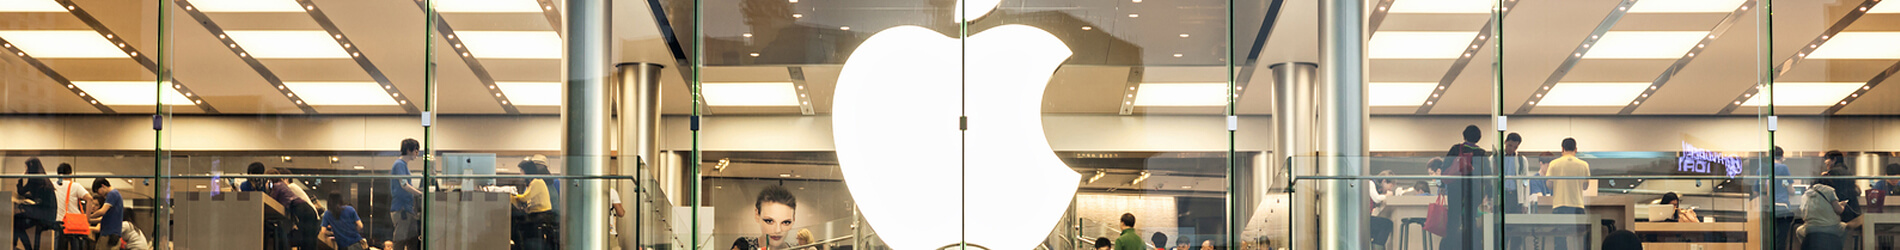 The Secret Of A Great Customer Experience - Apple Case Study